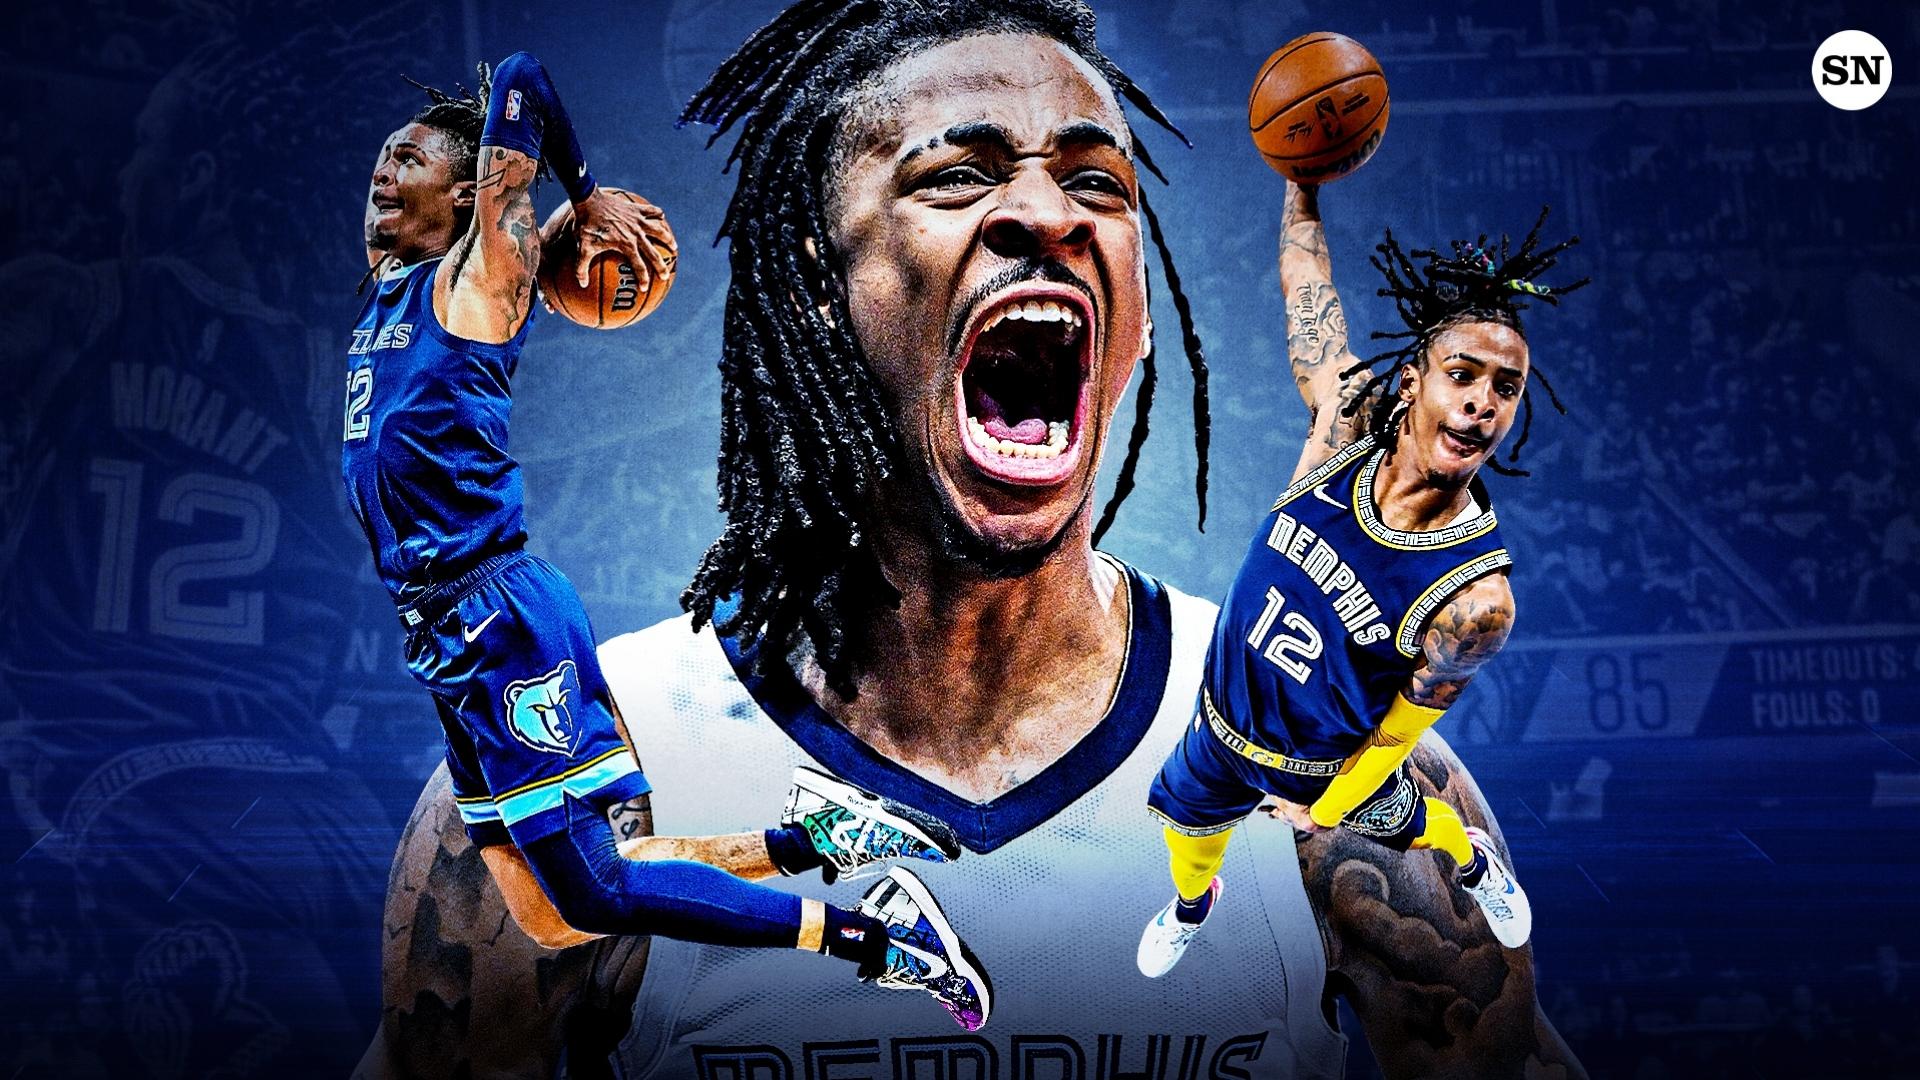 Ja Morant Wallpaper Discover more American Professional Basketball Player  College Ja Morant National   Basketball wallpaper Nba pictures  Basketball pictures